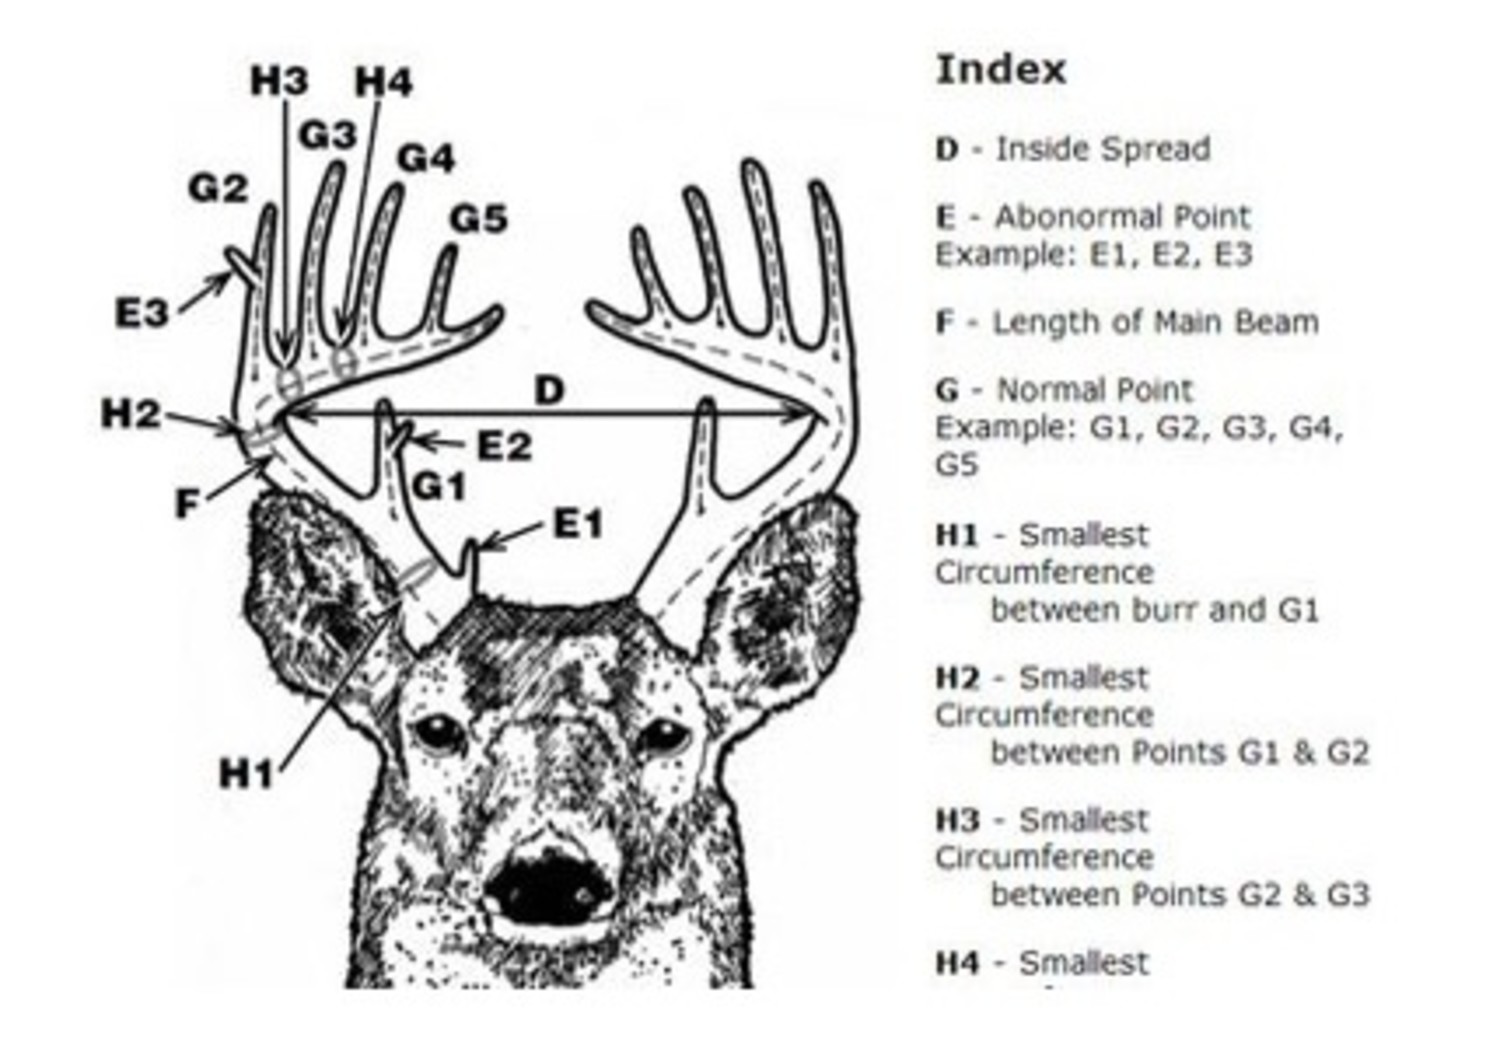 How to Score a Deer: The Antler Scoring System